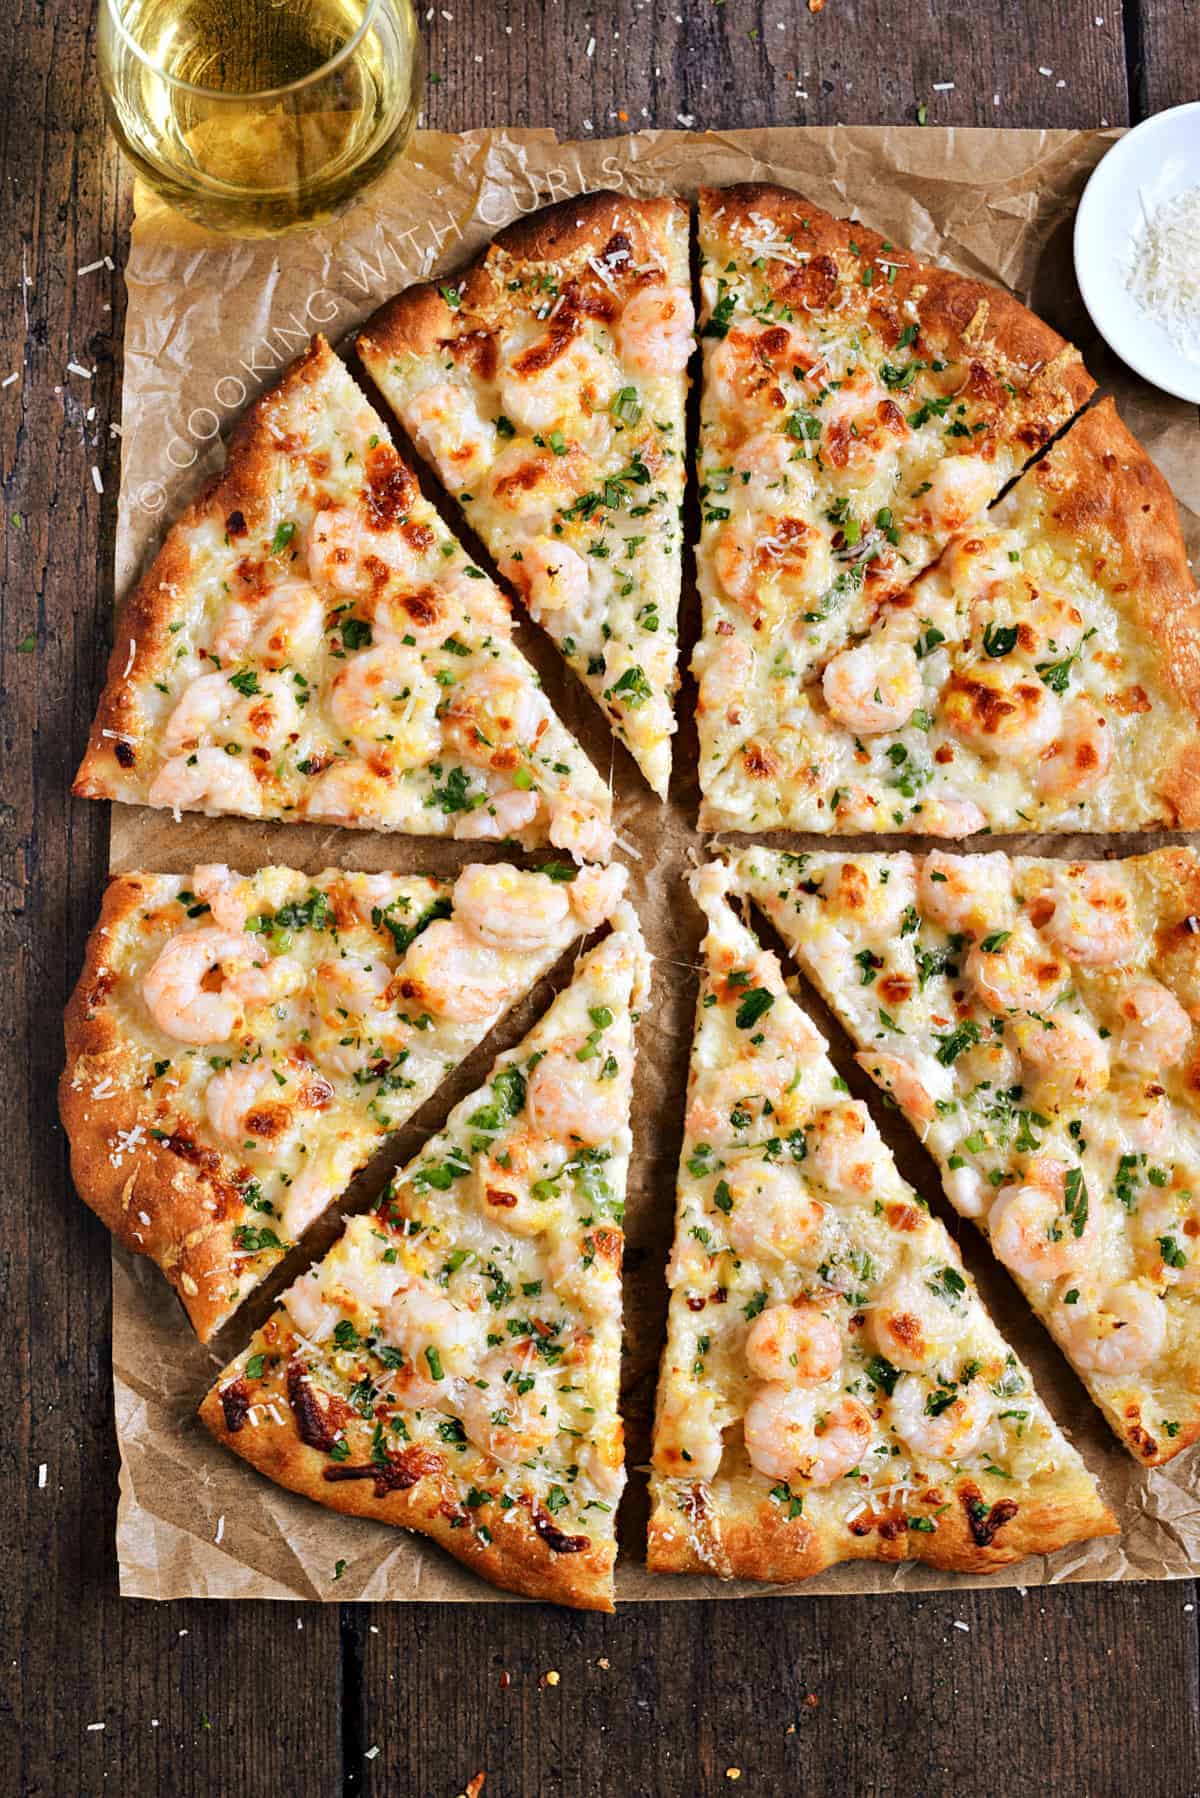 A sliced, shrimp pizza on a sheet of parchment paper with a glass of white wine in the left corner and bowl of Parmesan on the right.